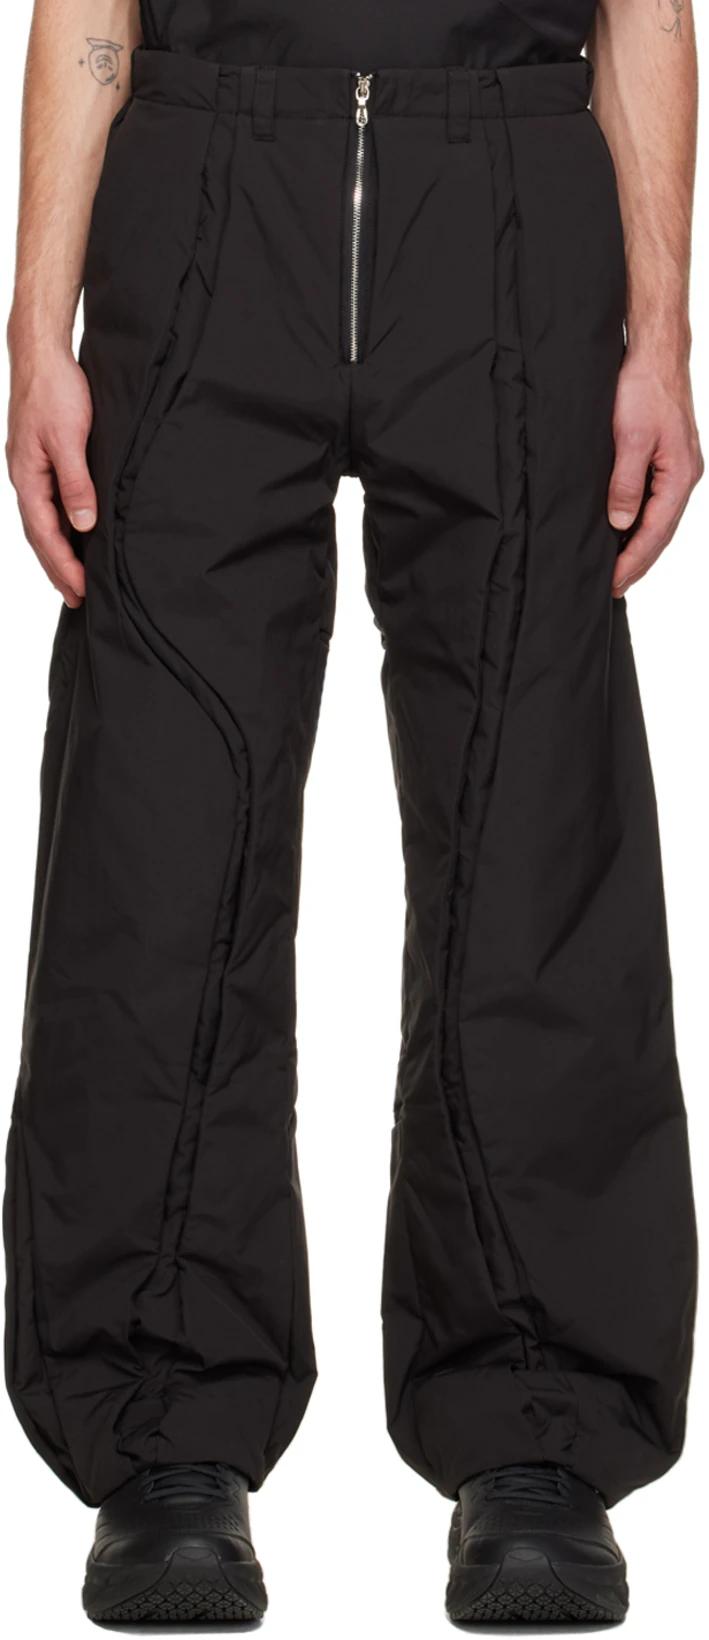 Black Spin Crevice Trousers by AENRMOUS